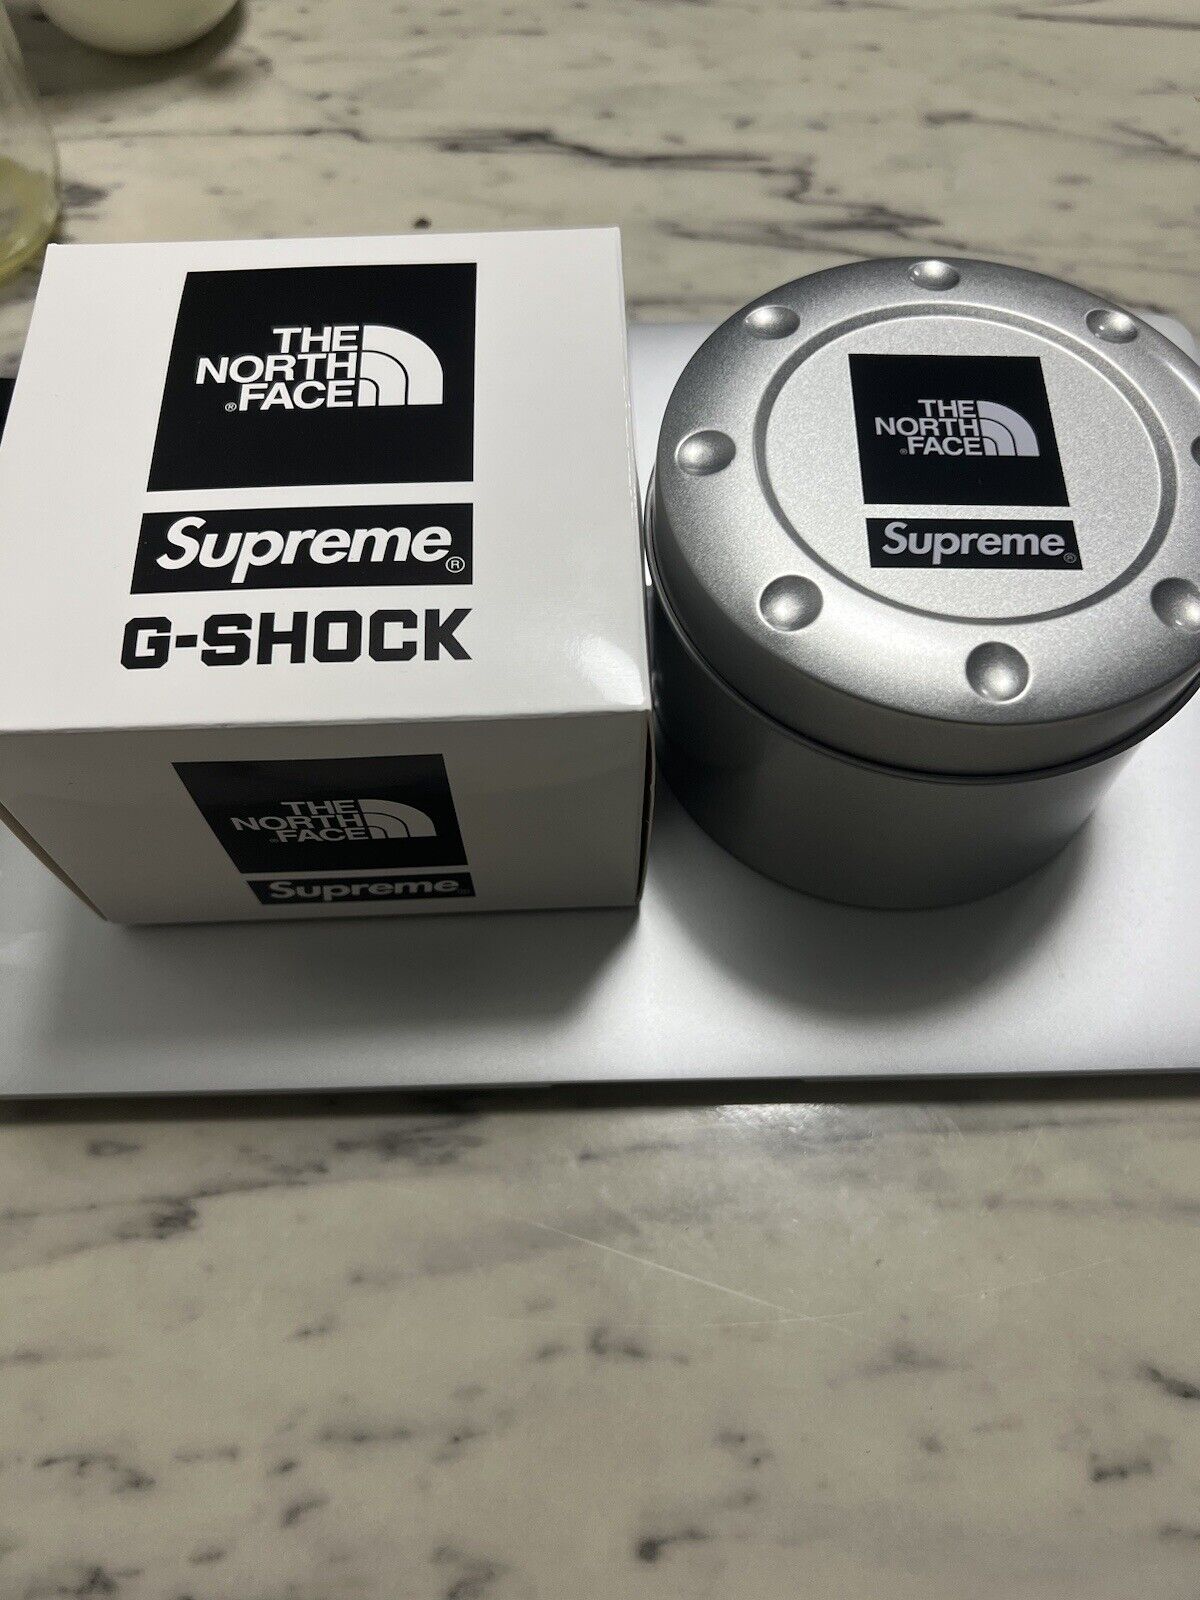 Supreme The North Face G-SHOCK Watch Yellow - Brand New In Hand | eBay